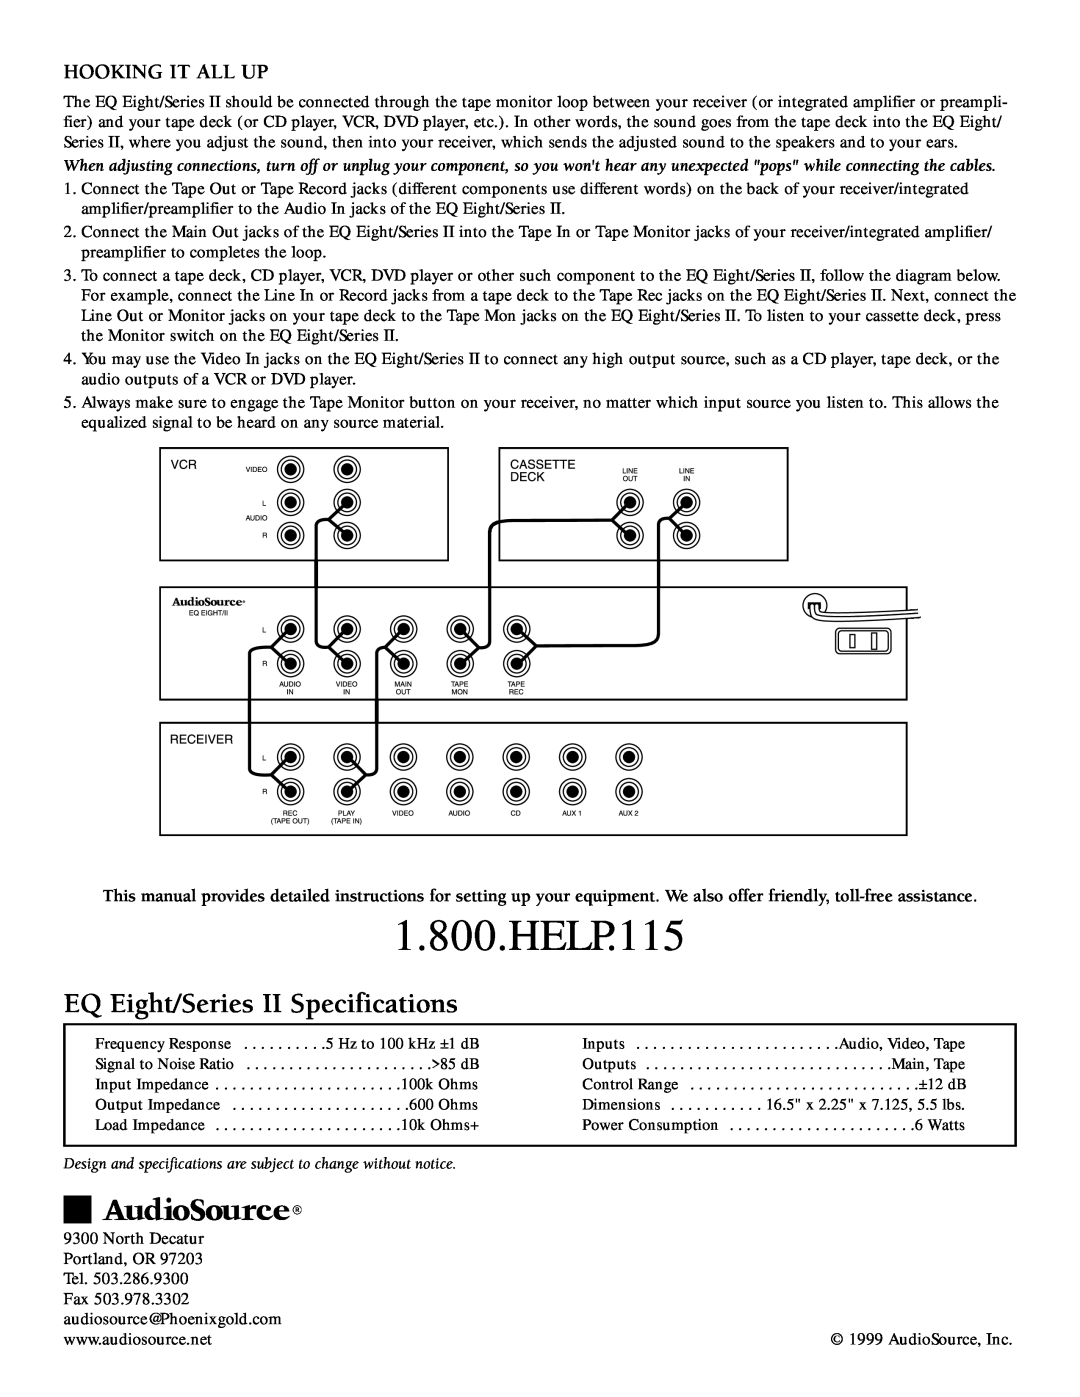 AudioSource owner manual Hooking It All Up, HELP.115, EQ Eight/Series II Specifications 